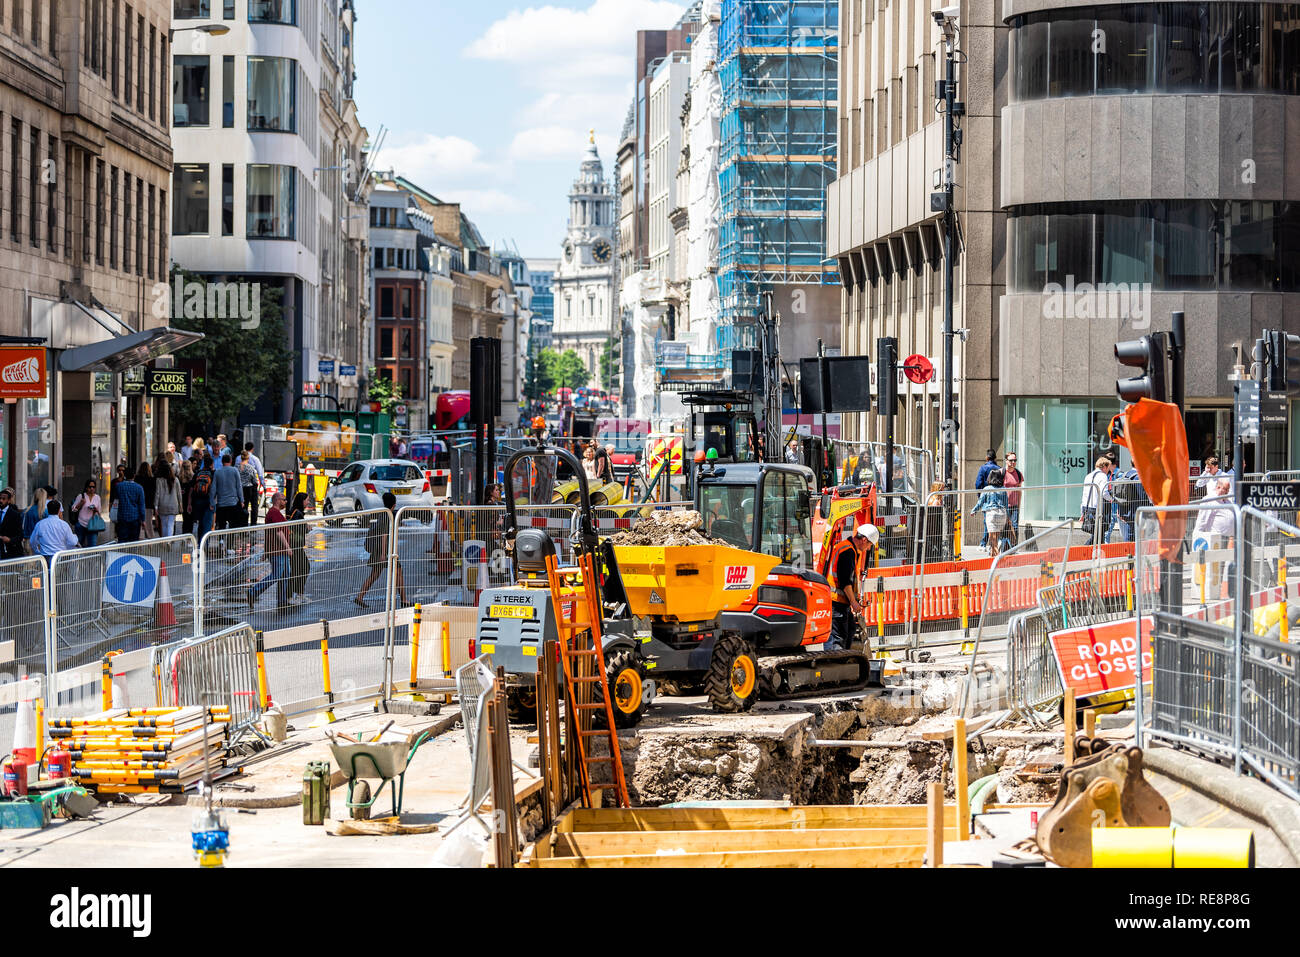 London, UK - June 22, 2018: High angle view of road construction site in city on Ludgate Hill or Fleet street Stock Photo